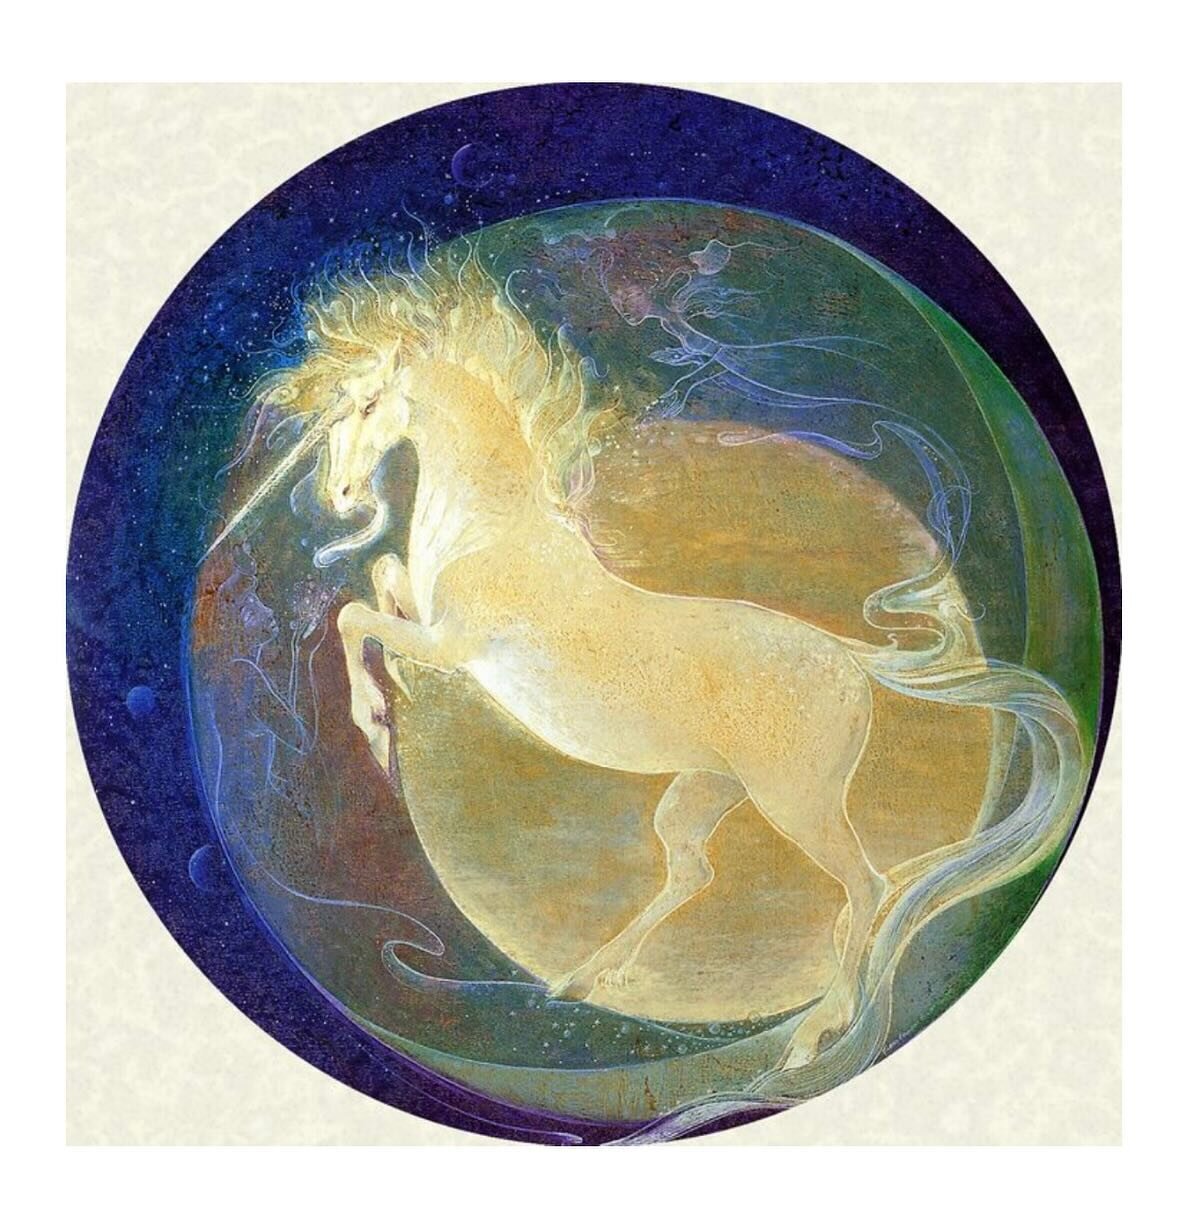 Entering 111 New moon Portal  with a touch of magic! Under Capricorn&rsquo;s influence, it&rsquo;s a time to dream big and make things happen. Dive into your imagination, visualize your goals listening what sparks your soul, and set disciplined inten